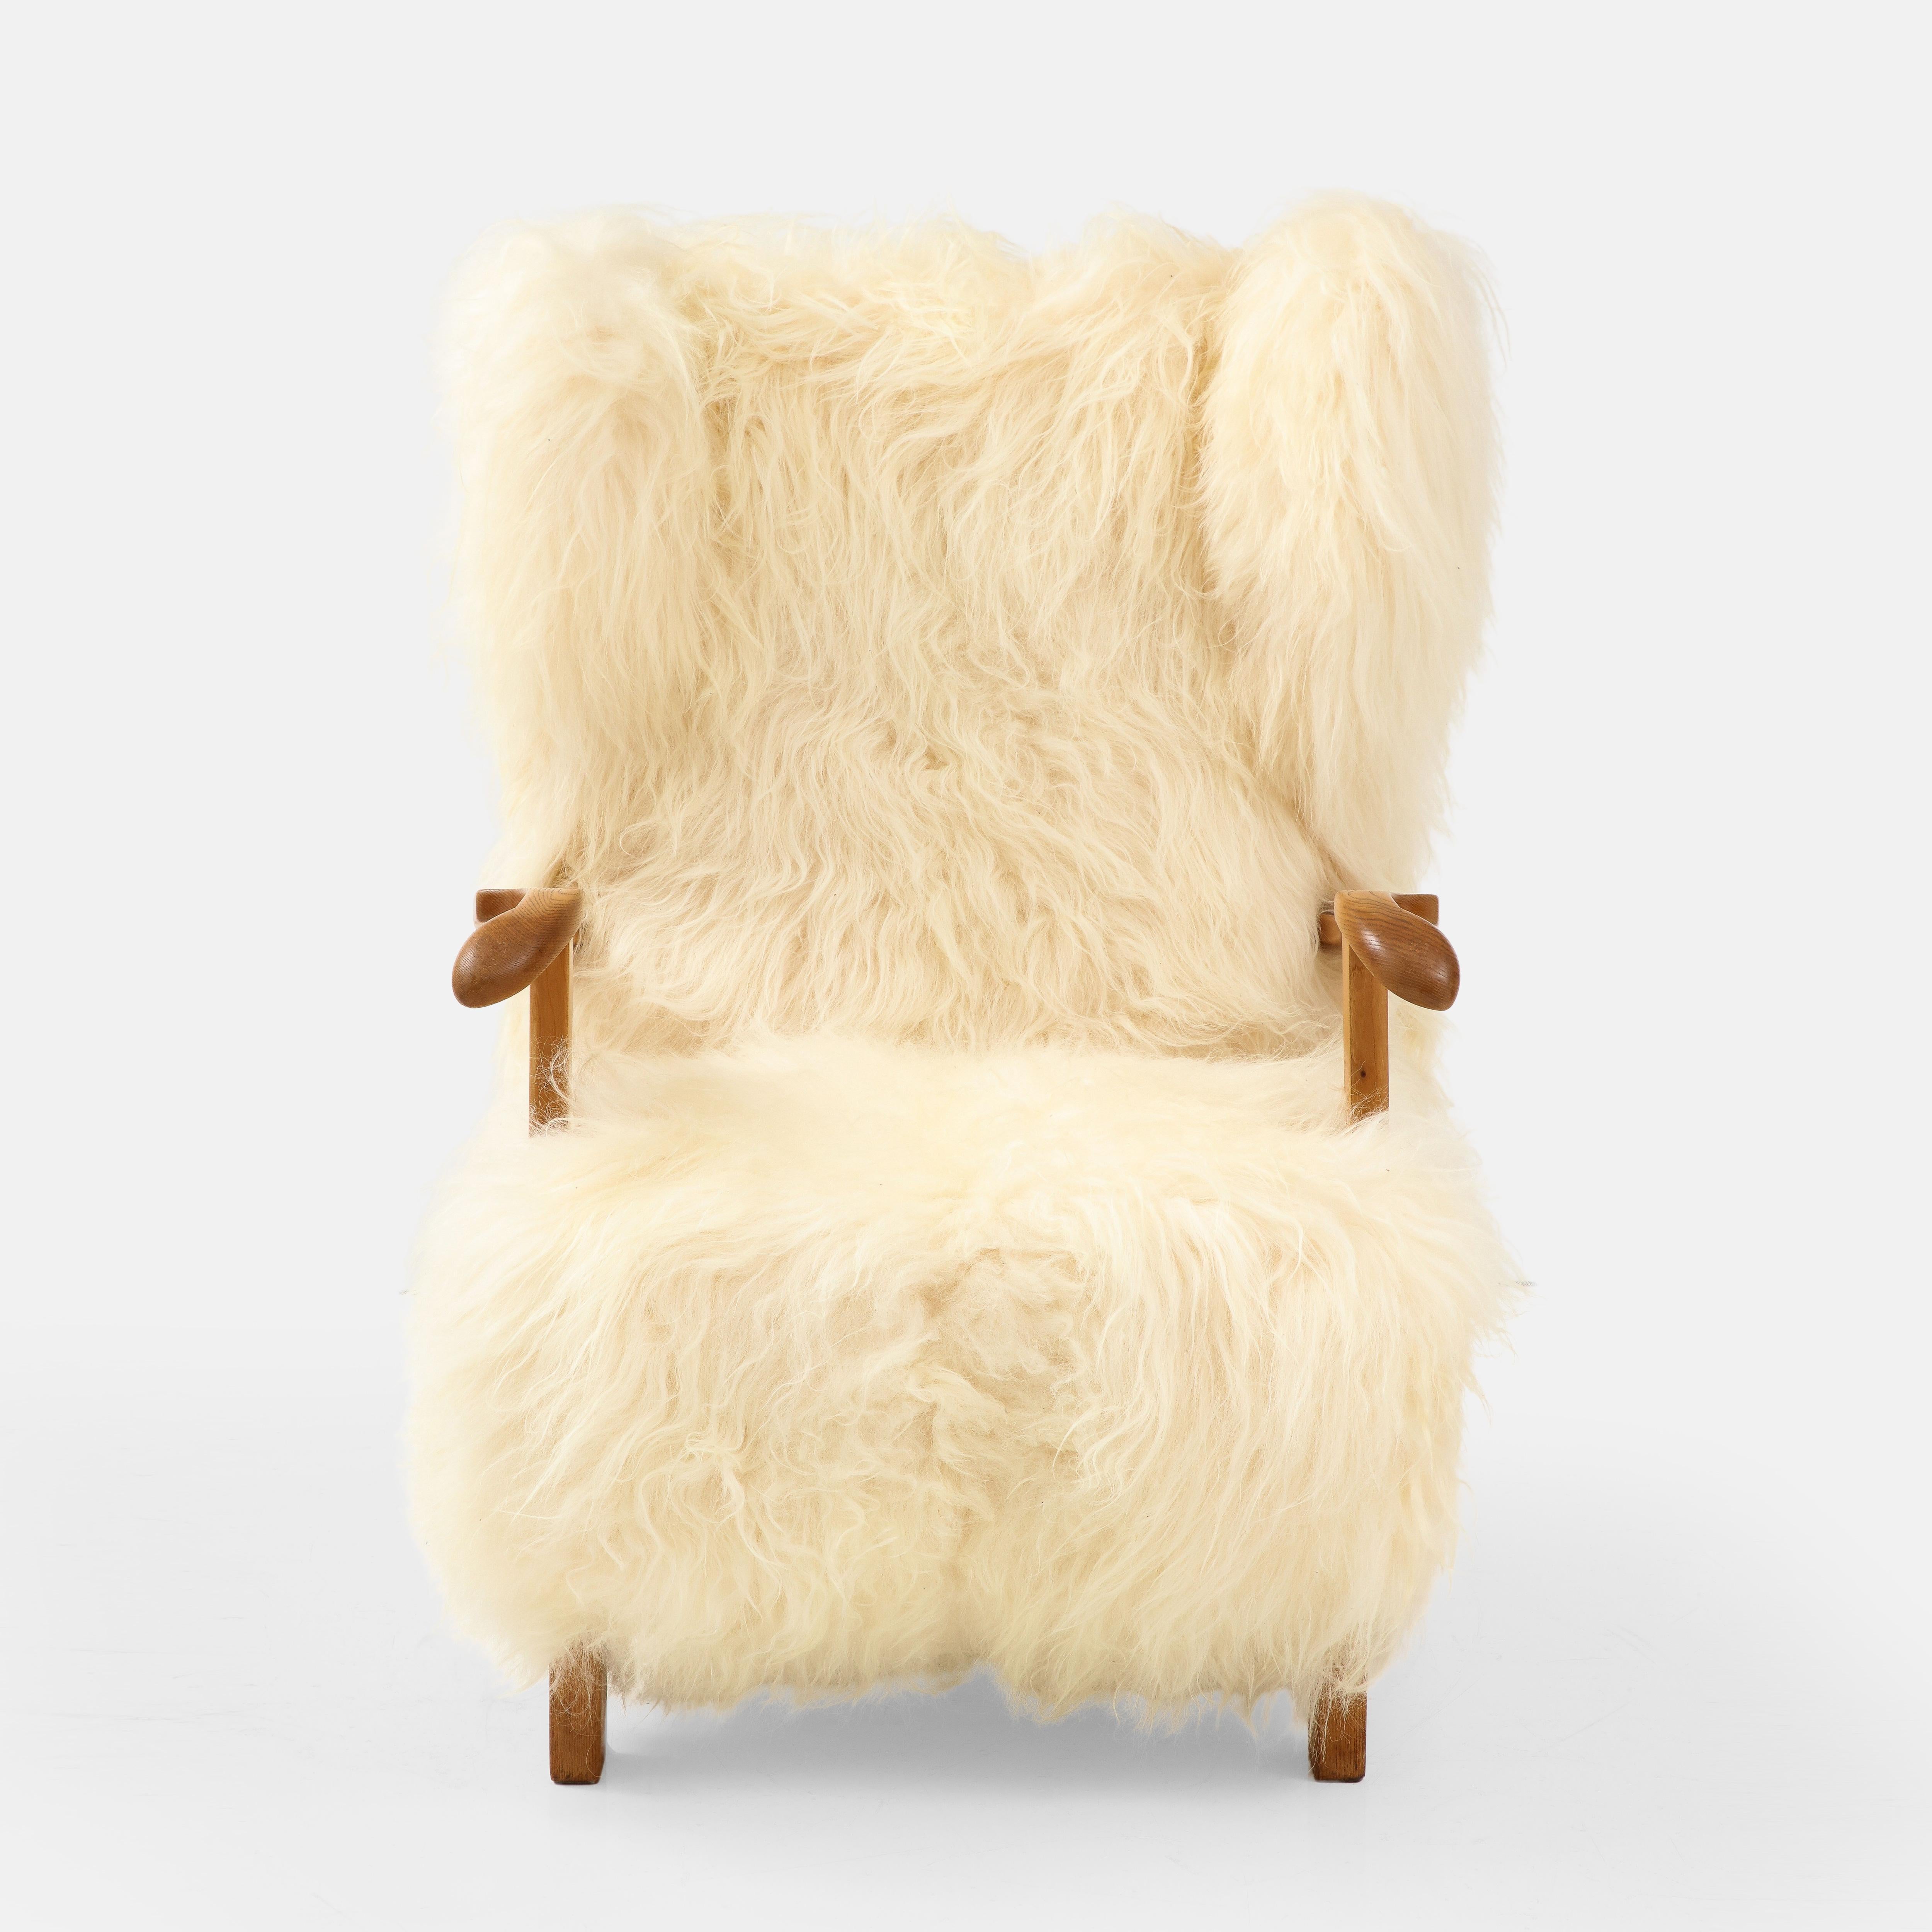 Fritz Hansen Rare Pair of Wingback Lounge Chairs Model 1582 in Sheepskin, 1930s For Sale 4